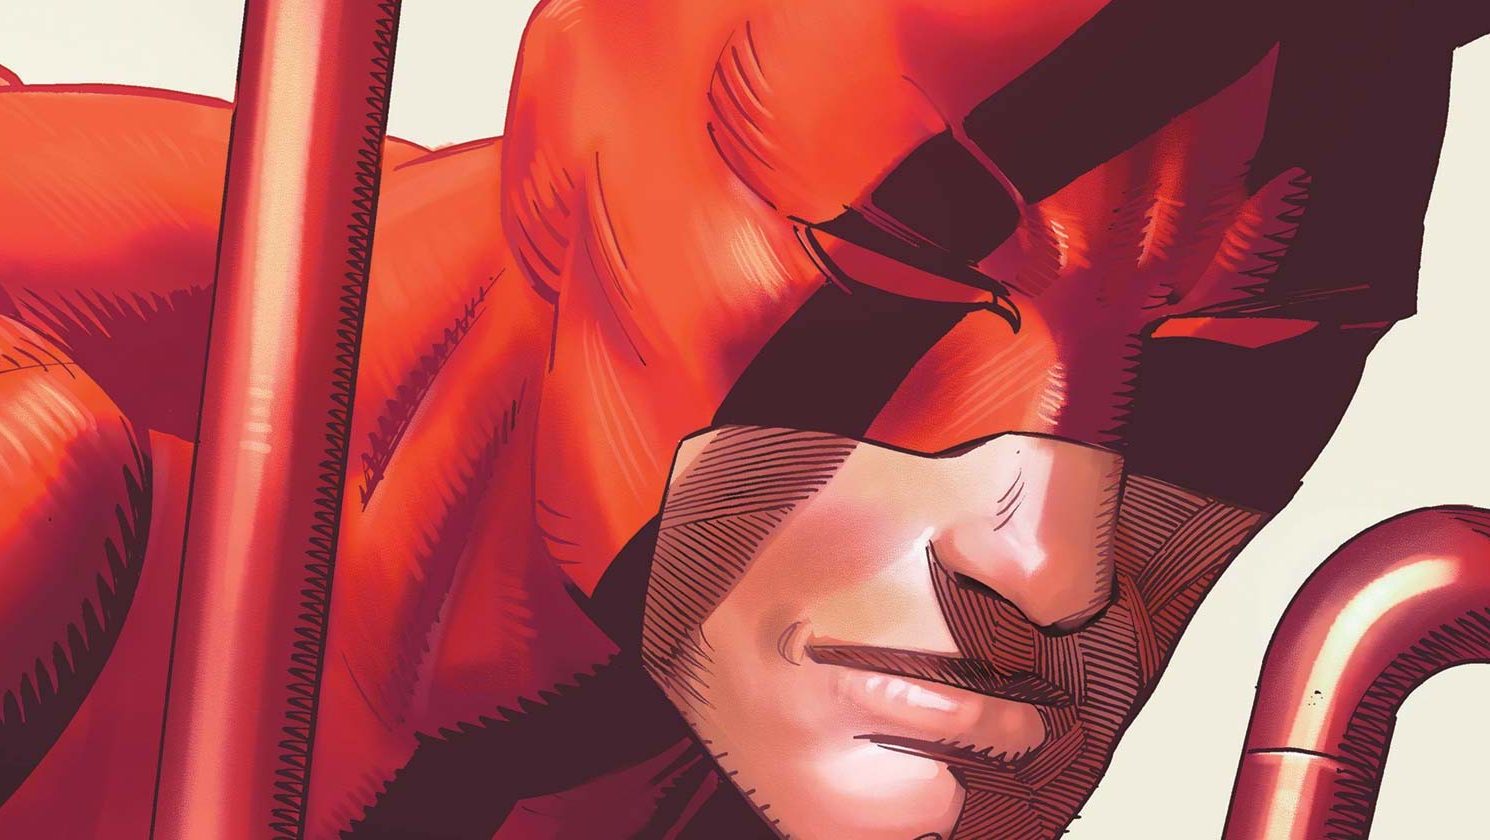 'Daredevil' #3 features an exceptional fight sequence